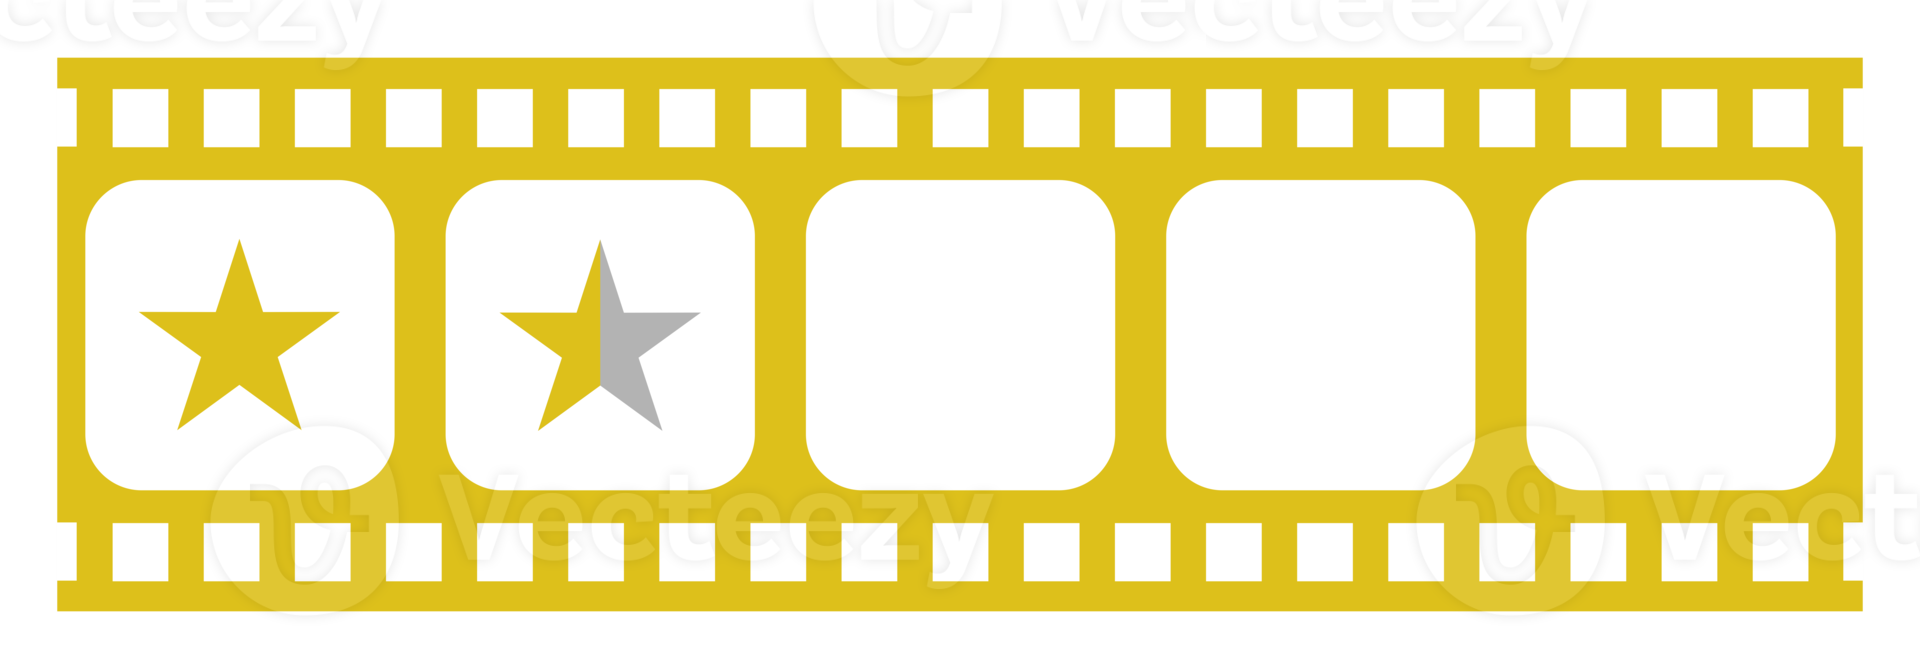 Visual of the Five 5 Star Sign in the Film Stripe Silhouette. Star Rating Icon Symbol for Film or Movie Review, Pictogram, Apps, Website or Graphic Design Element. Rating 1,5 Star. Format PNG